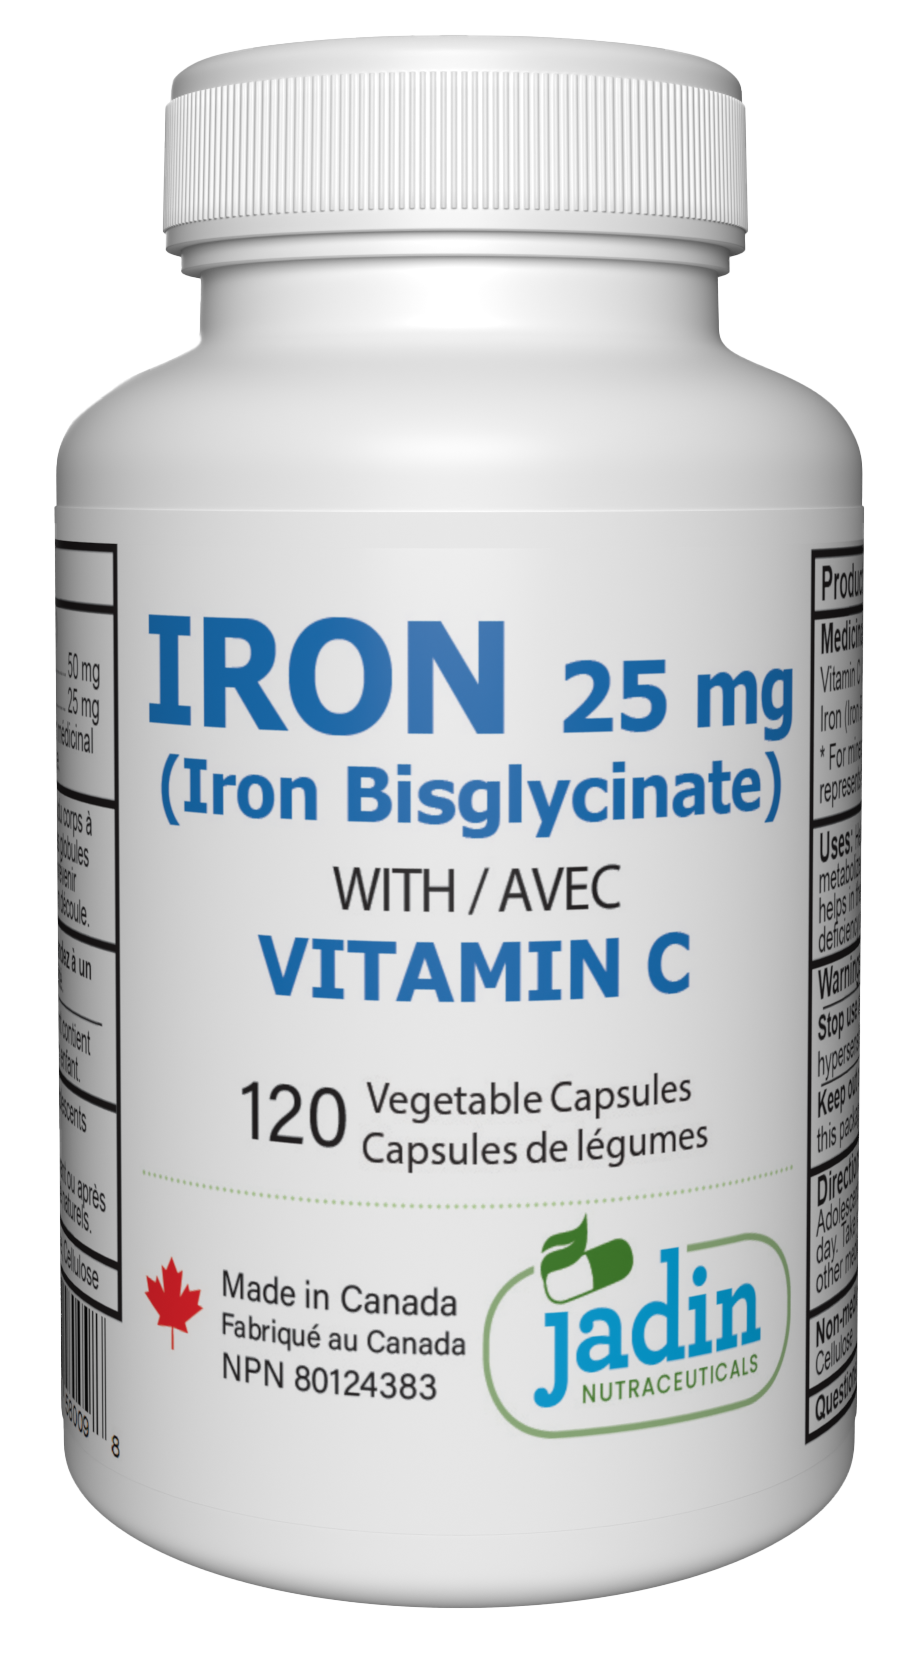 Iron Bisglycinate 25 mg with Vitamin C – 120 Vegetable Capsules